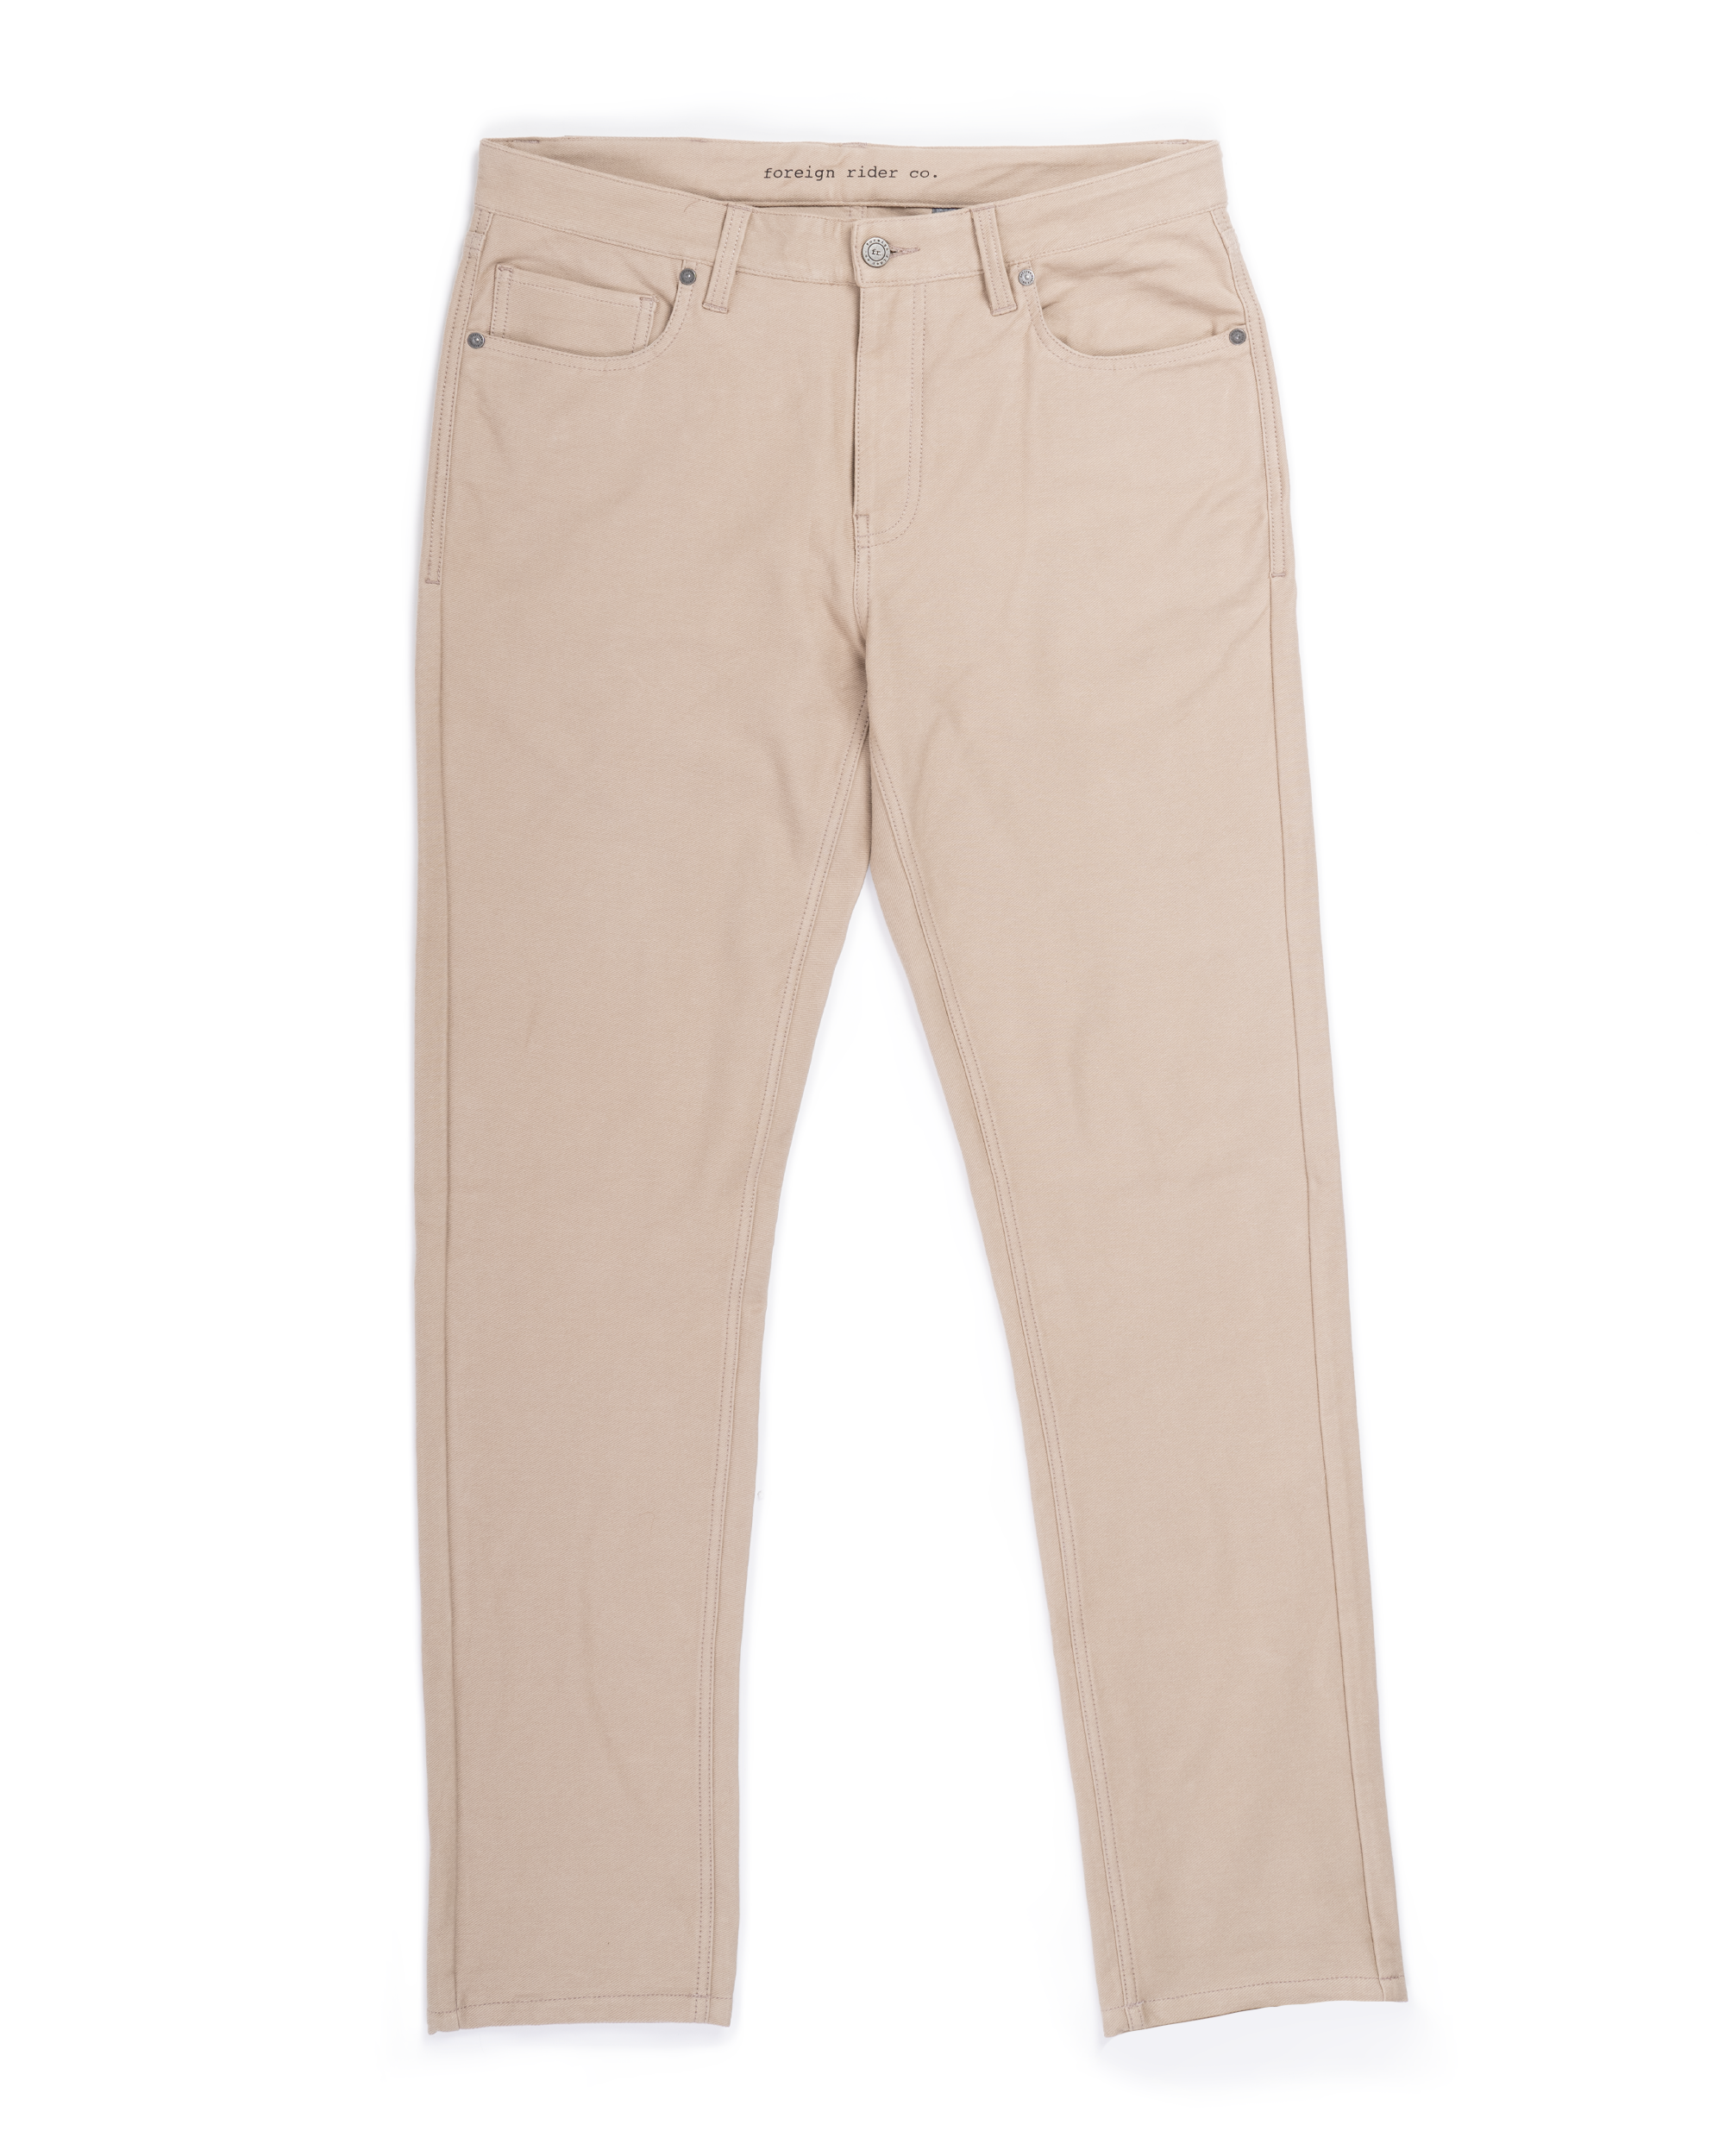 5 Pocket Organic Cotton Pant Tan - Foreign Rider Co.